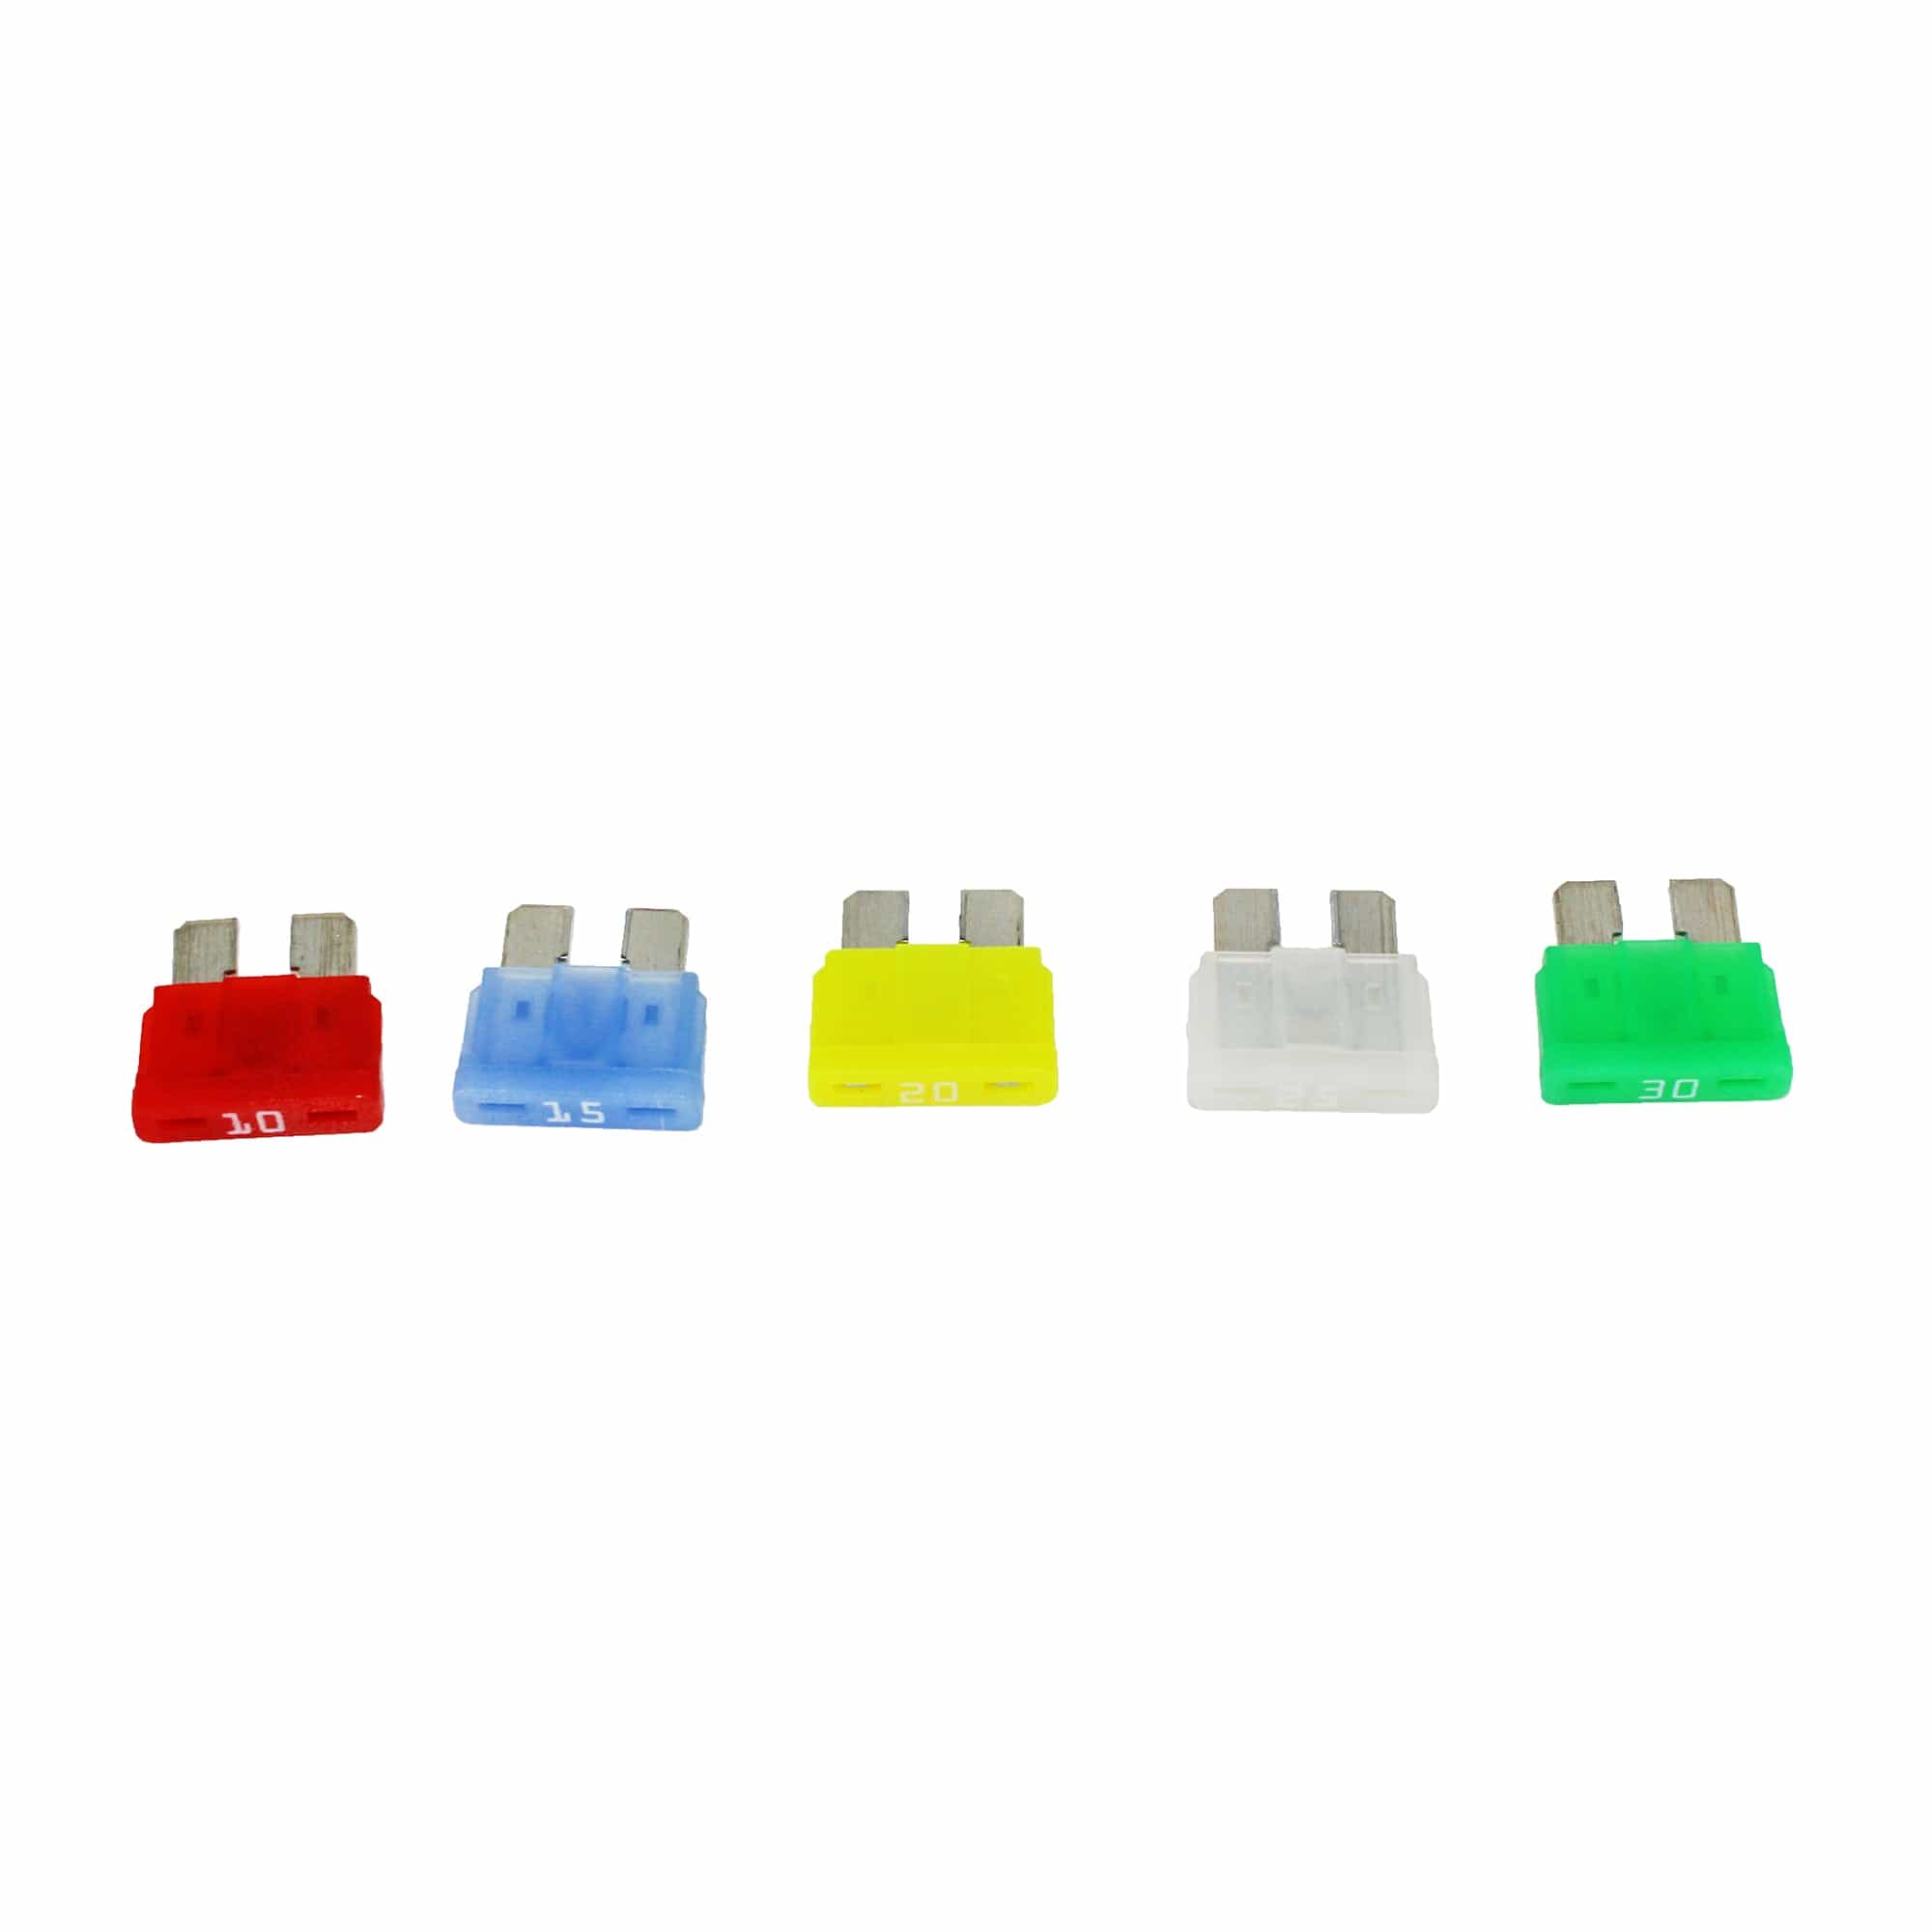 Littelfuse 00940202ZPGLO SMART GLO ATO 10A-30A Fuse Assortment - 5 Pack